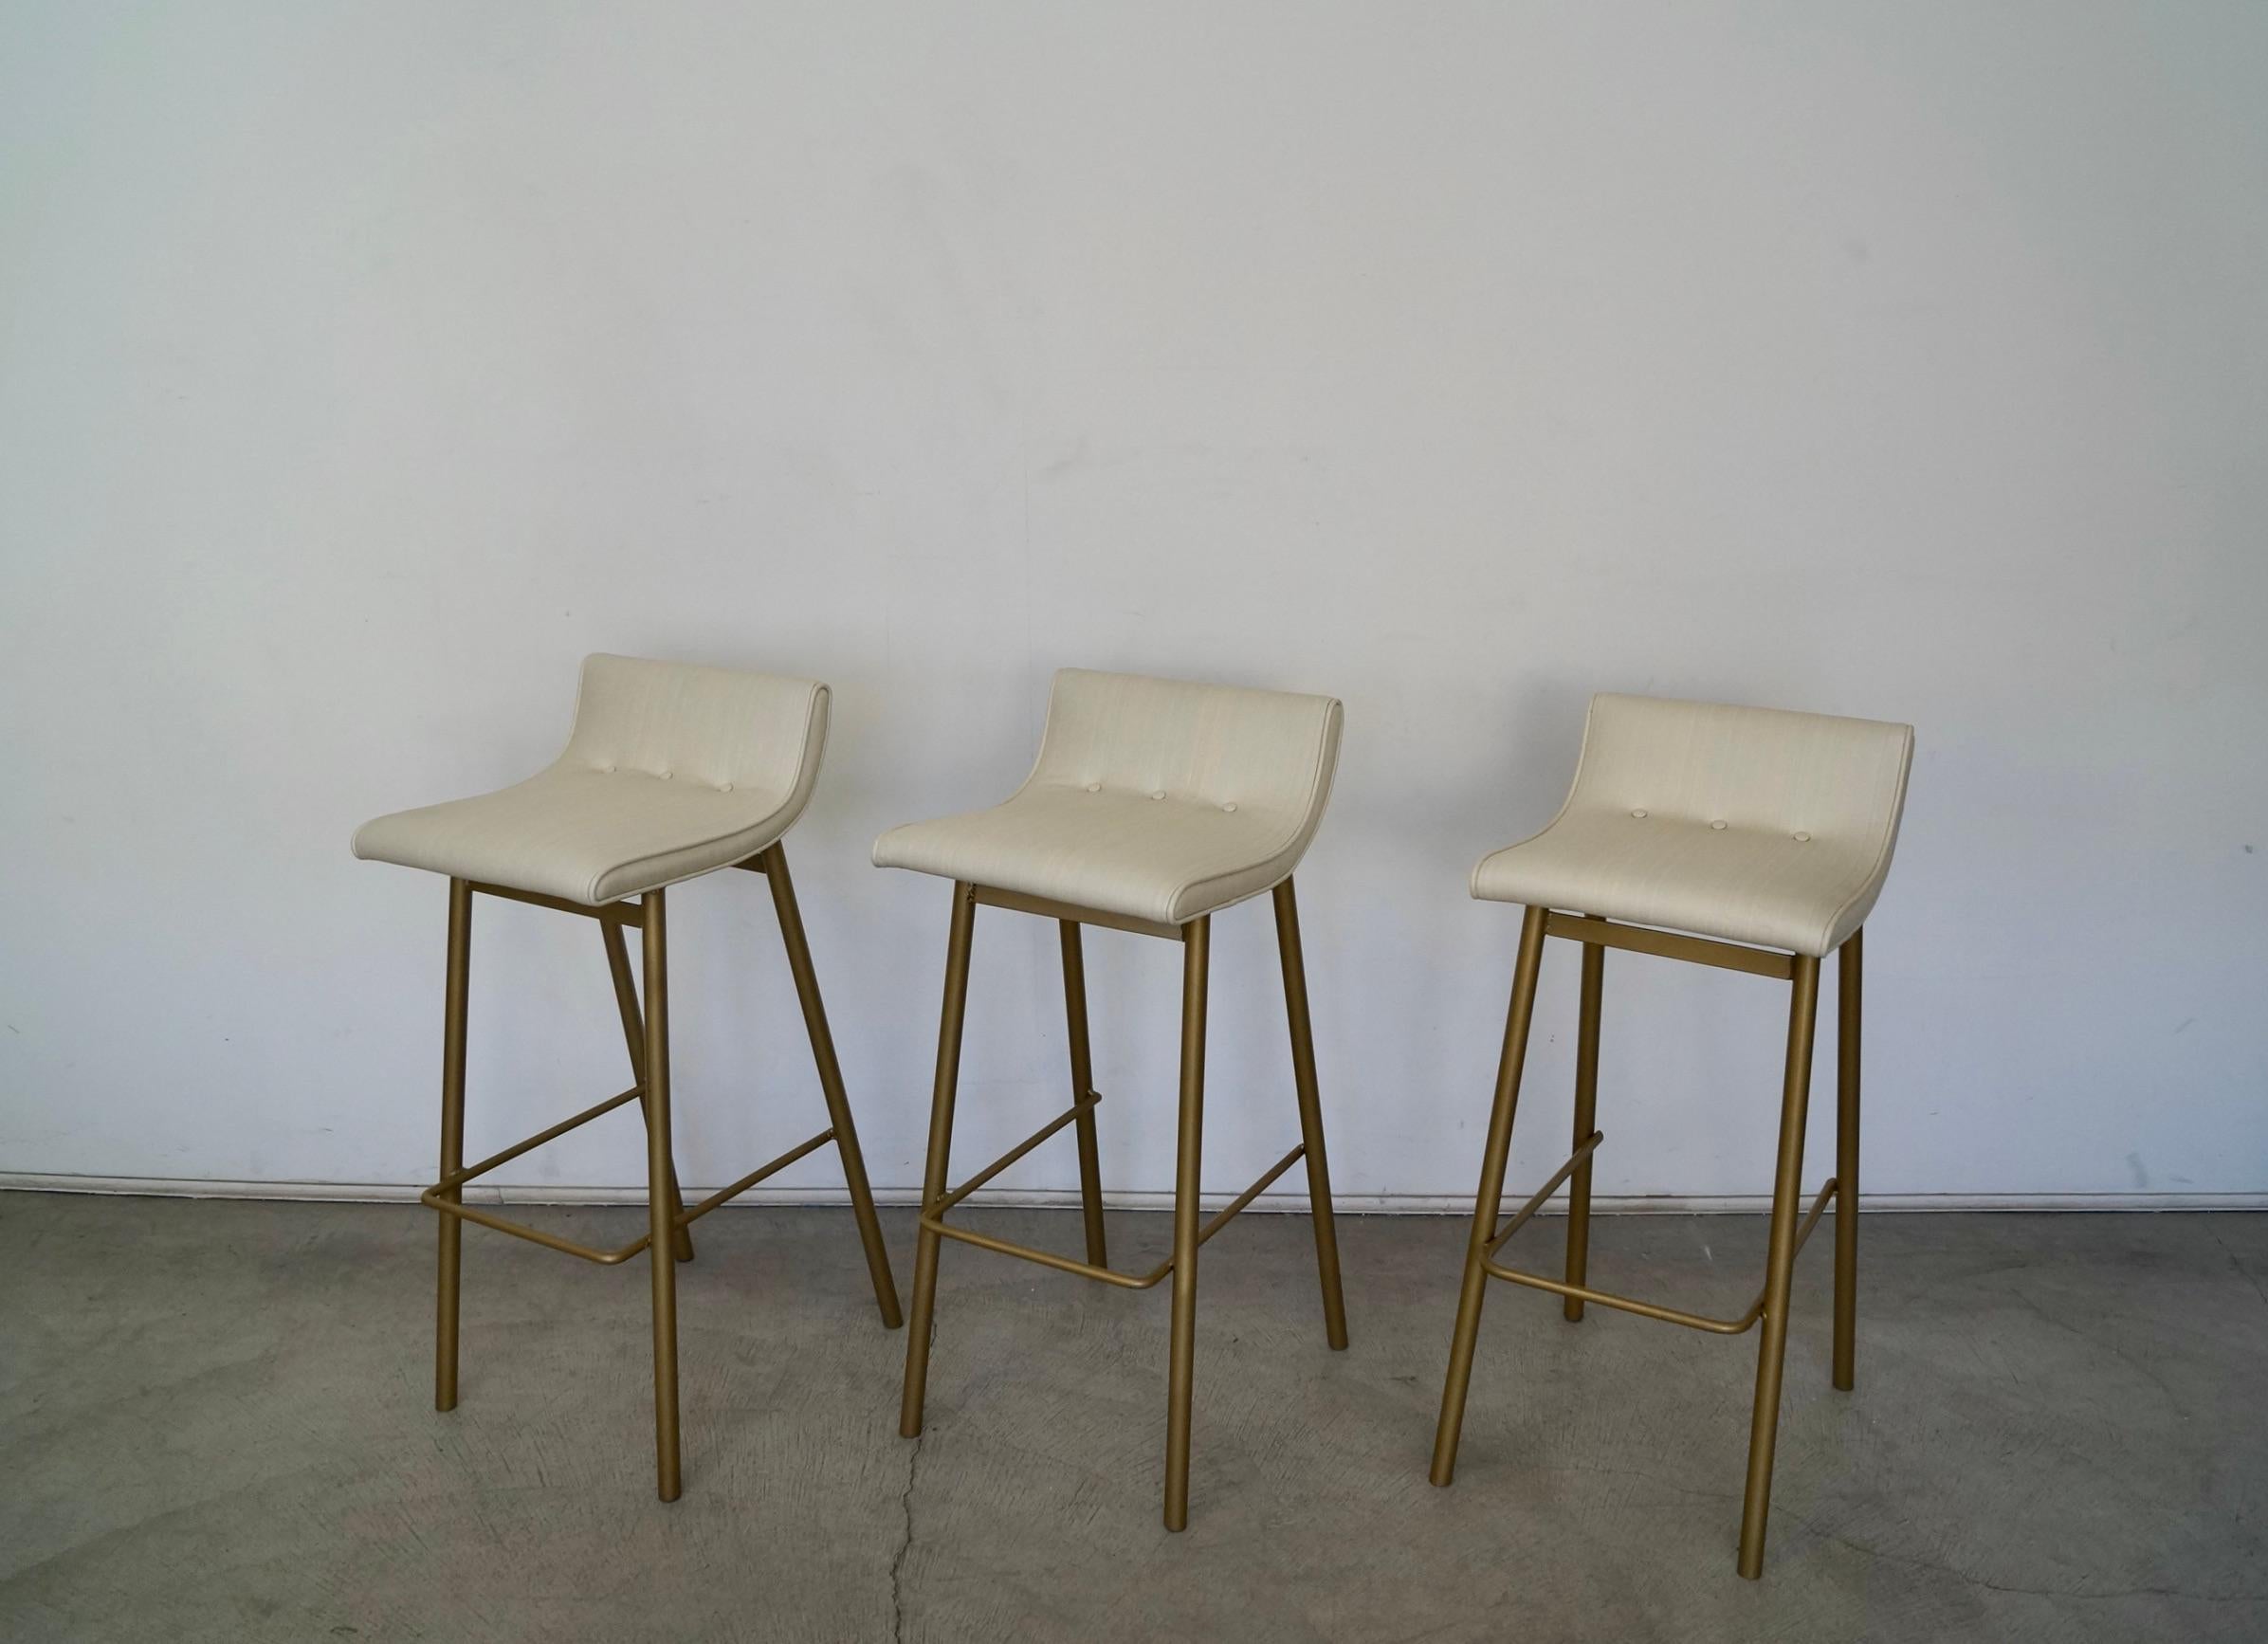 Mid-20th Century 1950's Mid-Century Modern Bar Stools by Vista of California - Set of Three For Sale